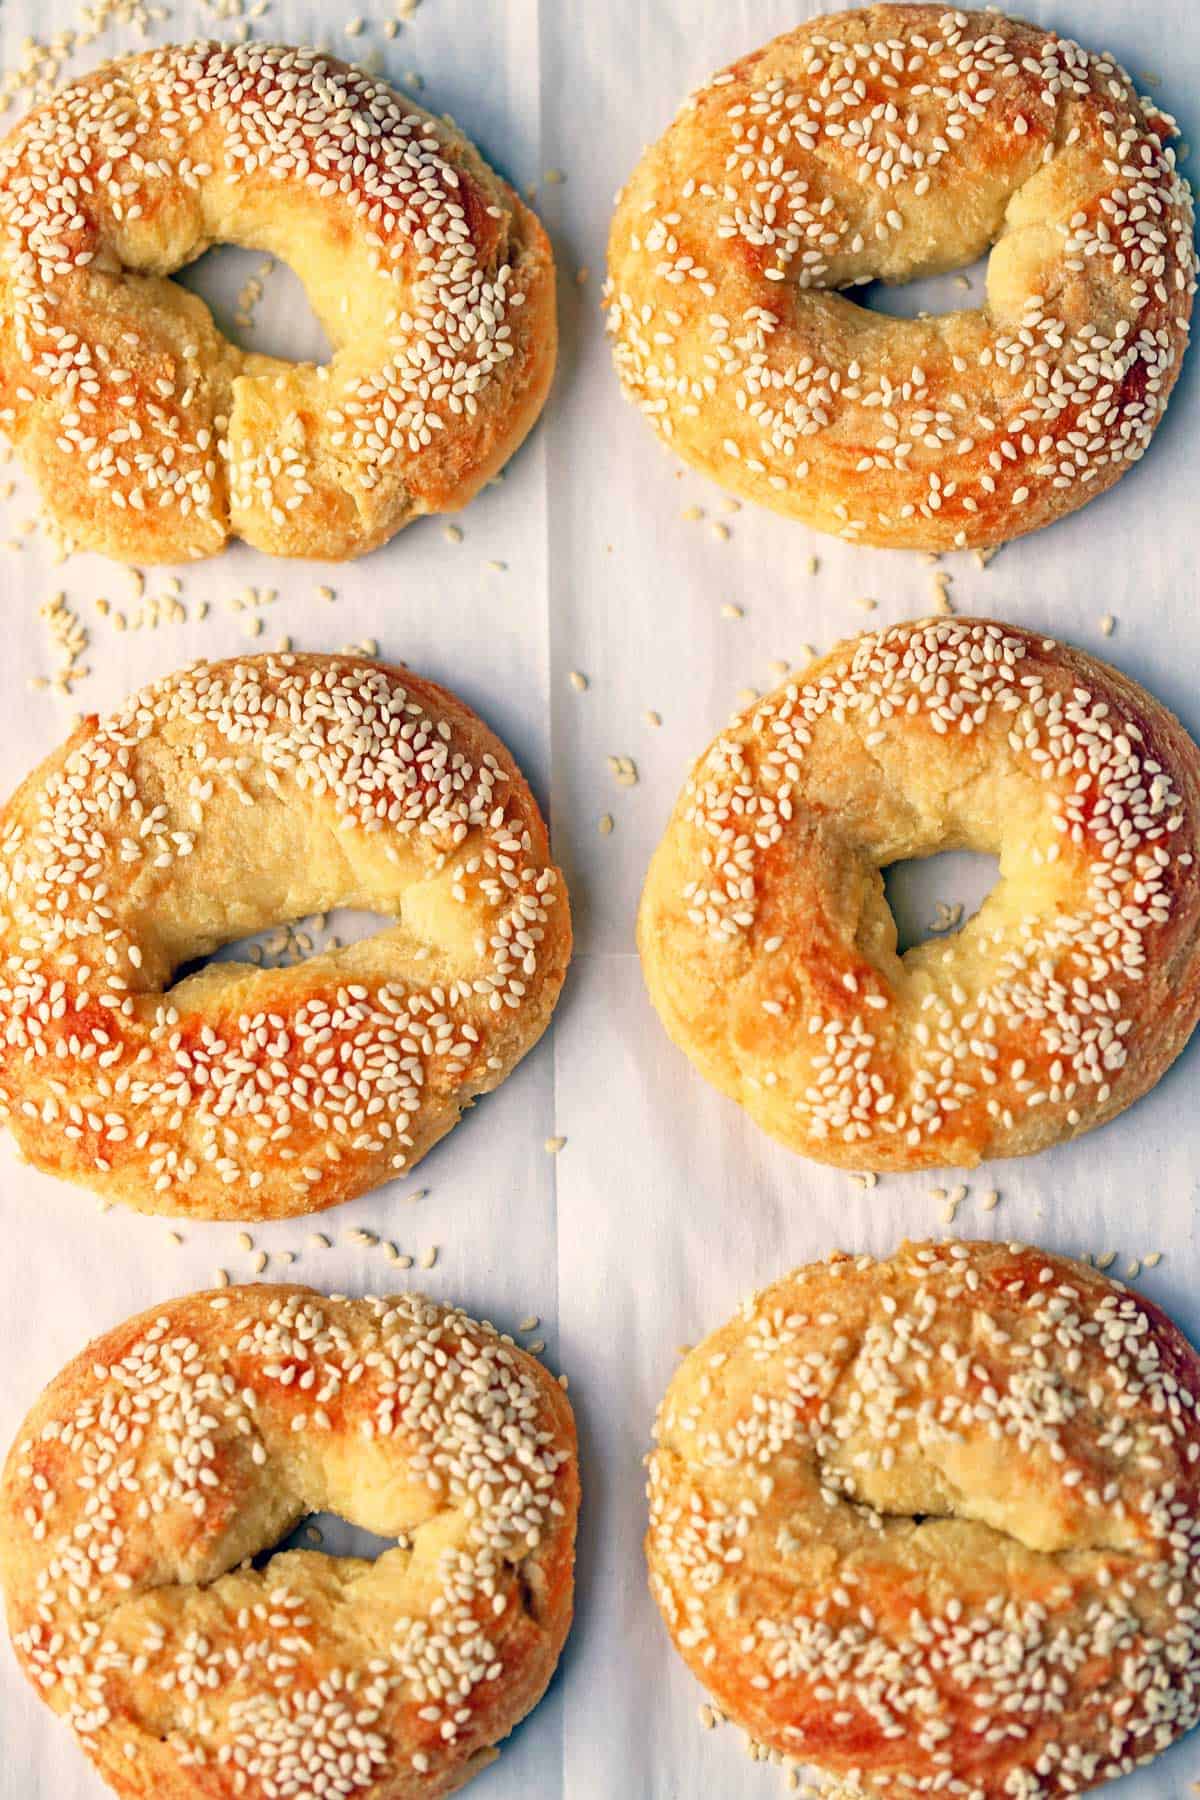 Low-carb bagels topped with sesame seeds.